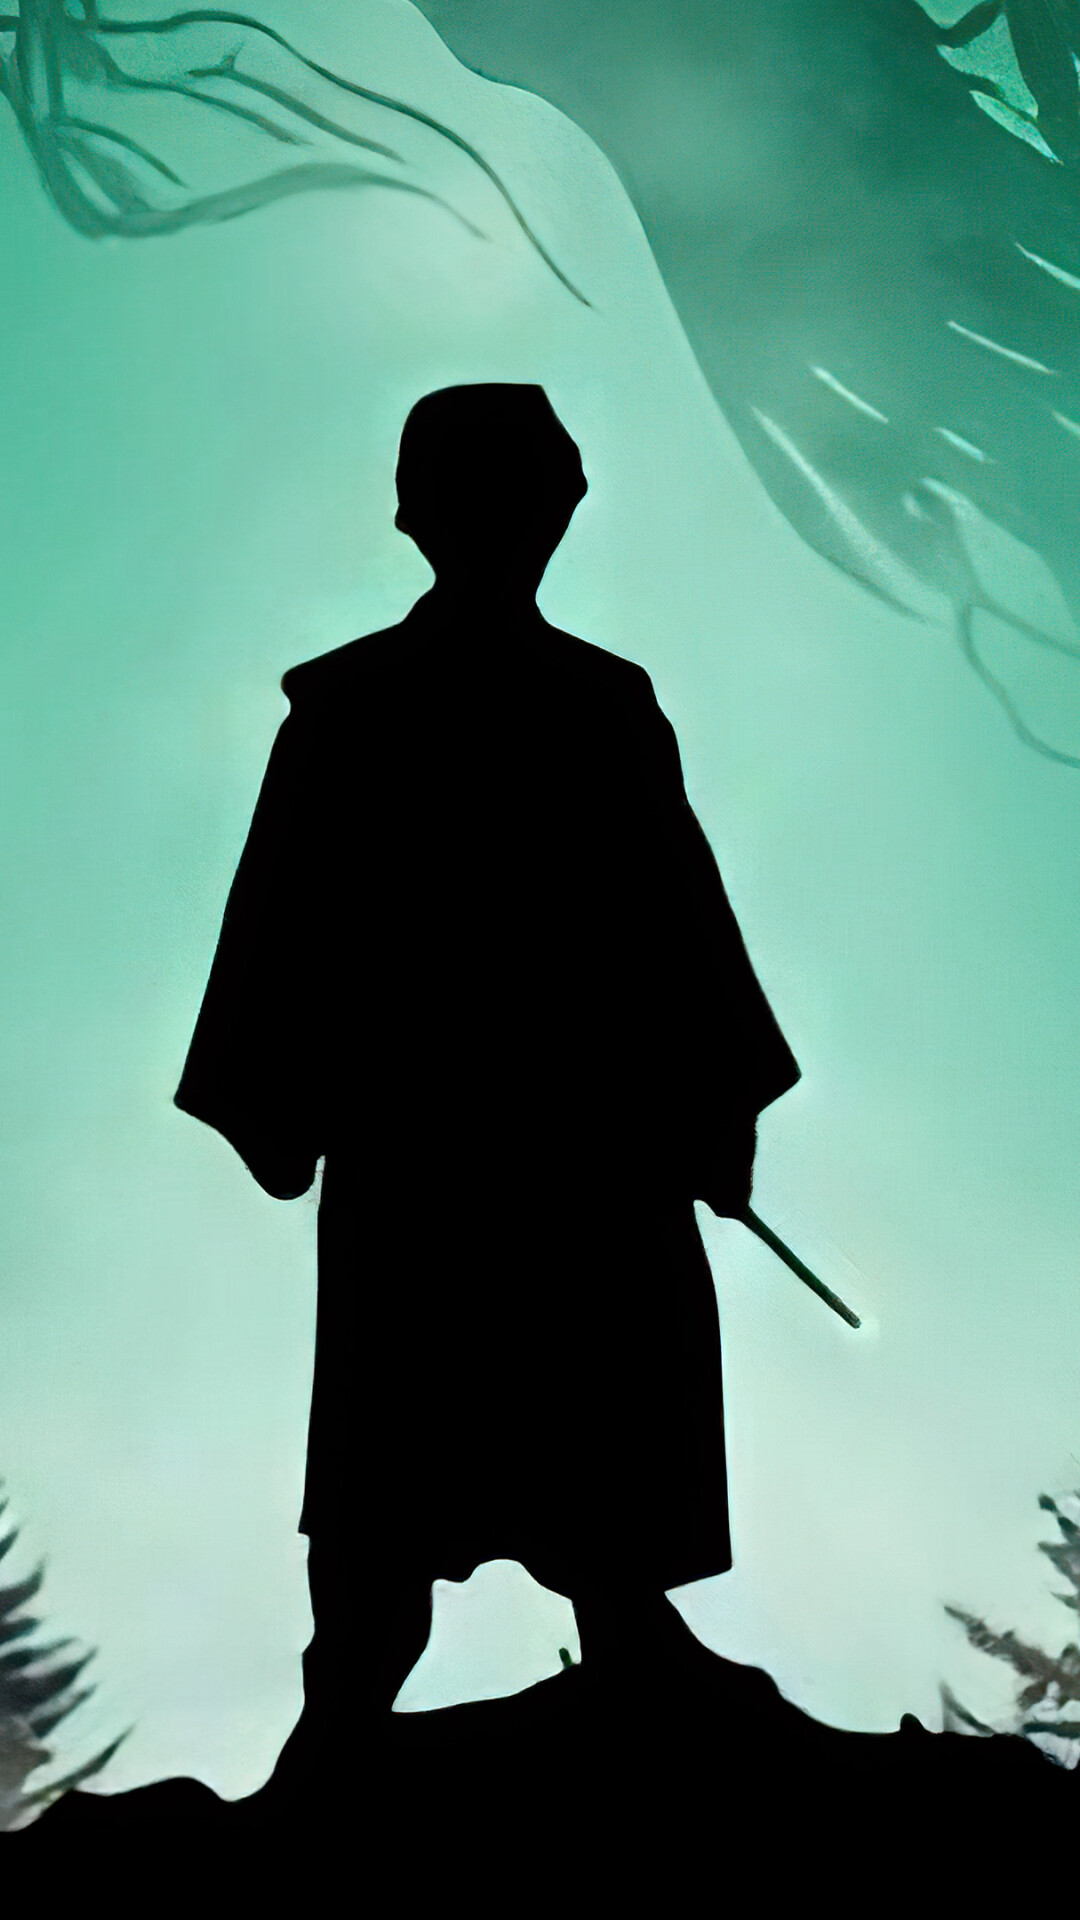 Harry Potter: An English half-blood wizard, and one of the most famous wizards of modern times. 1080x1920 Full HD Background.